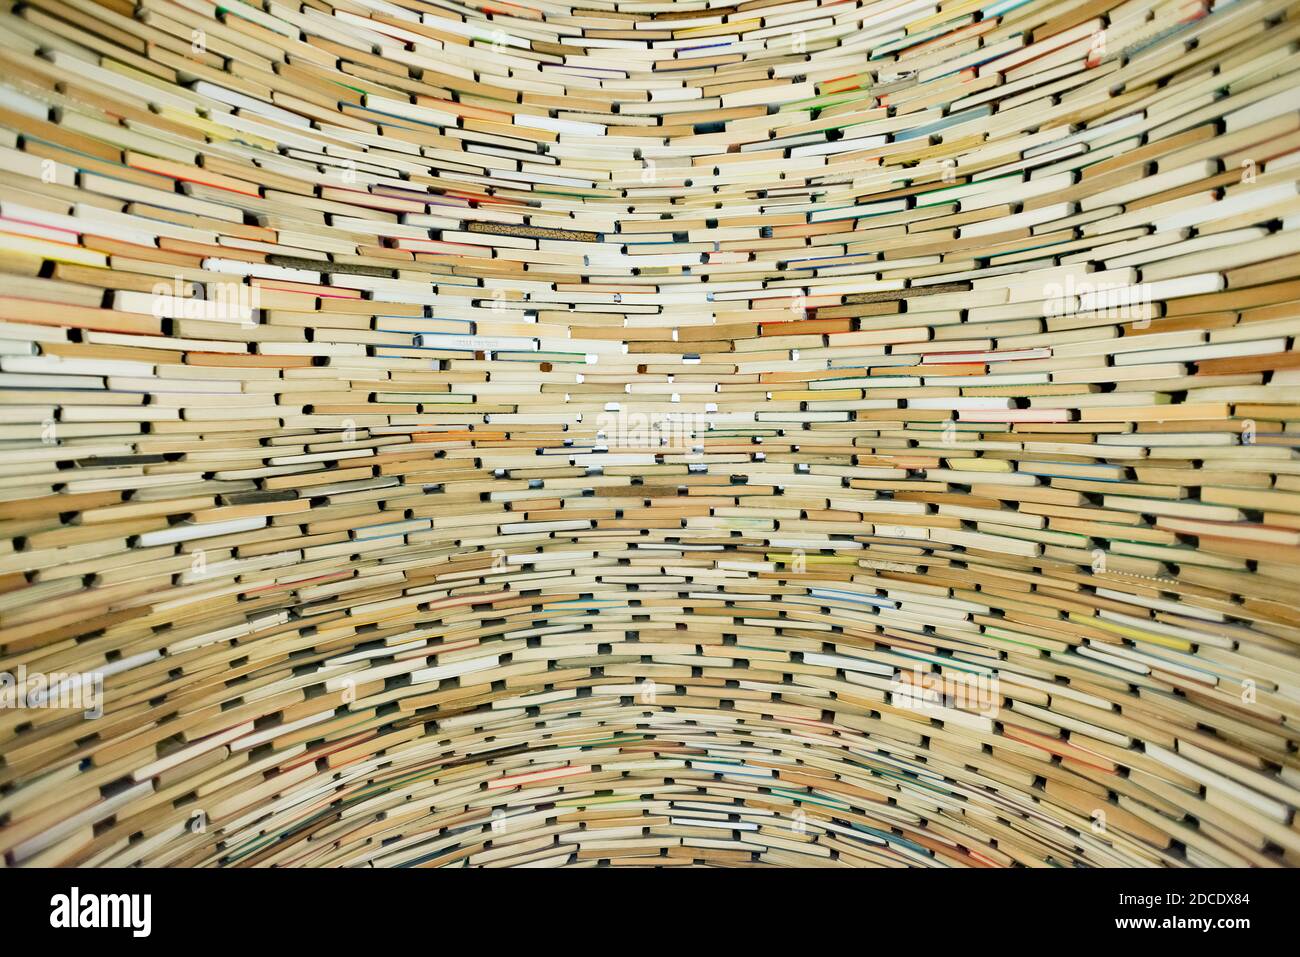 Wall of books. Well made from books. Stack of books. Stock Photo